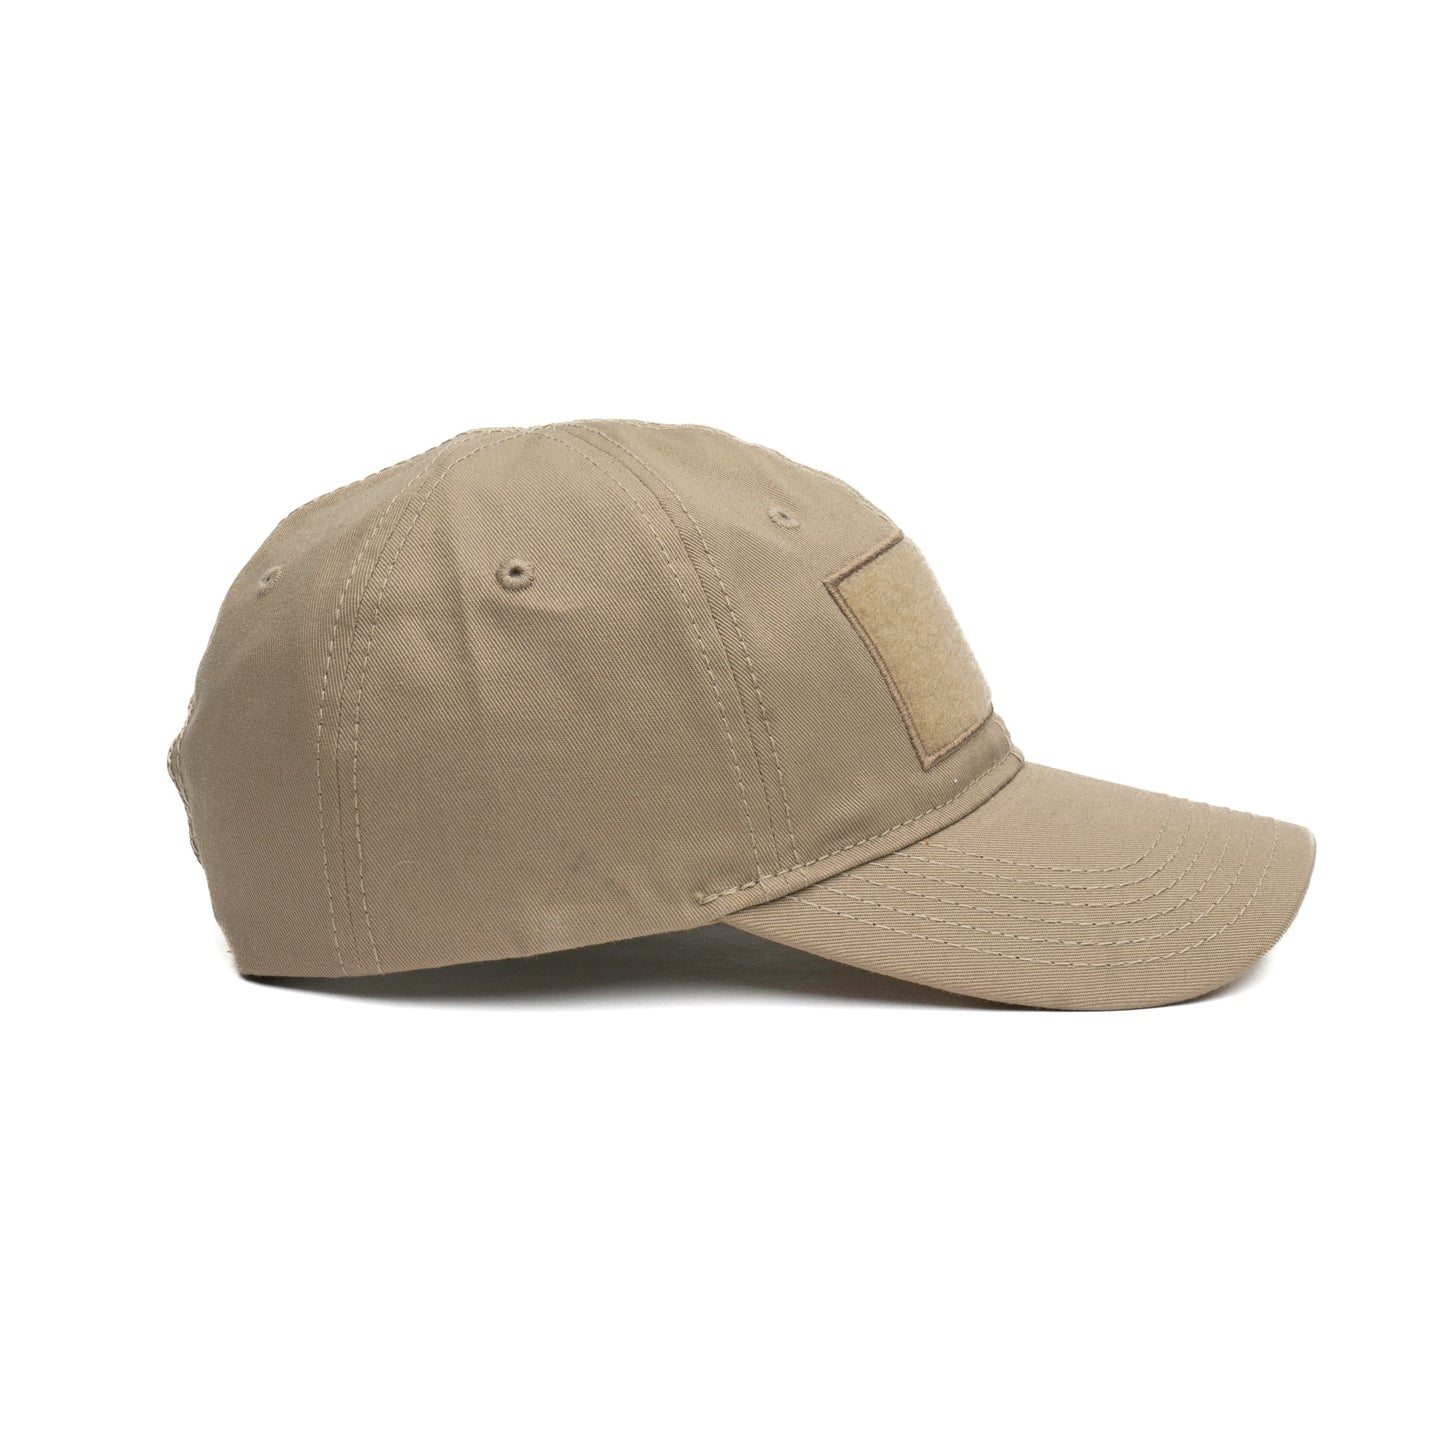 Grunt Style Operator Hat in Tan for Men | Grunt Style